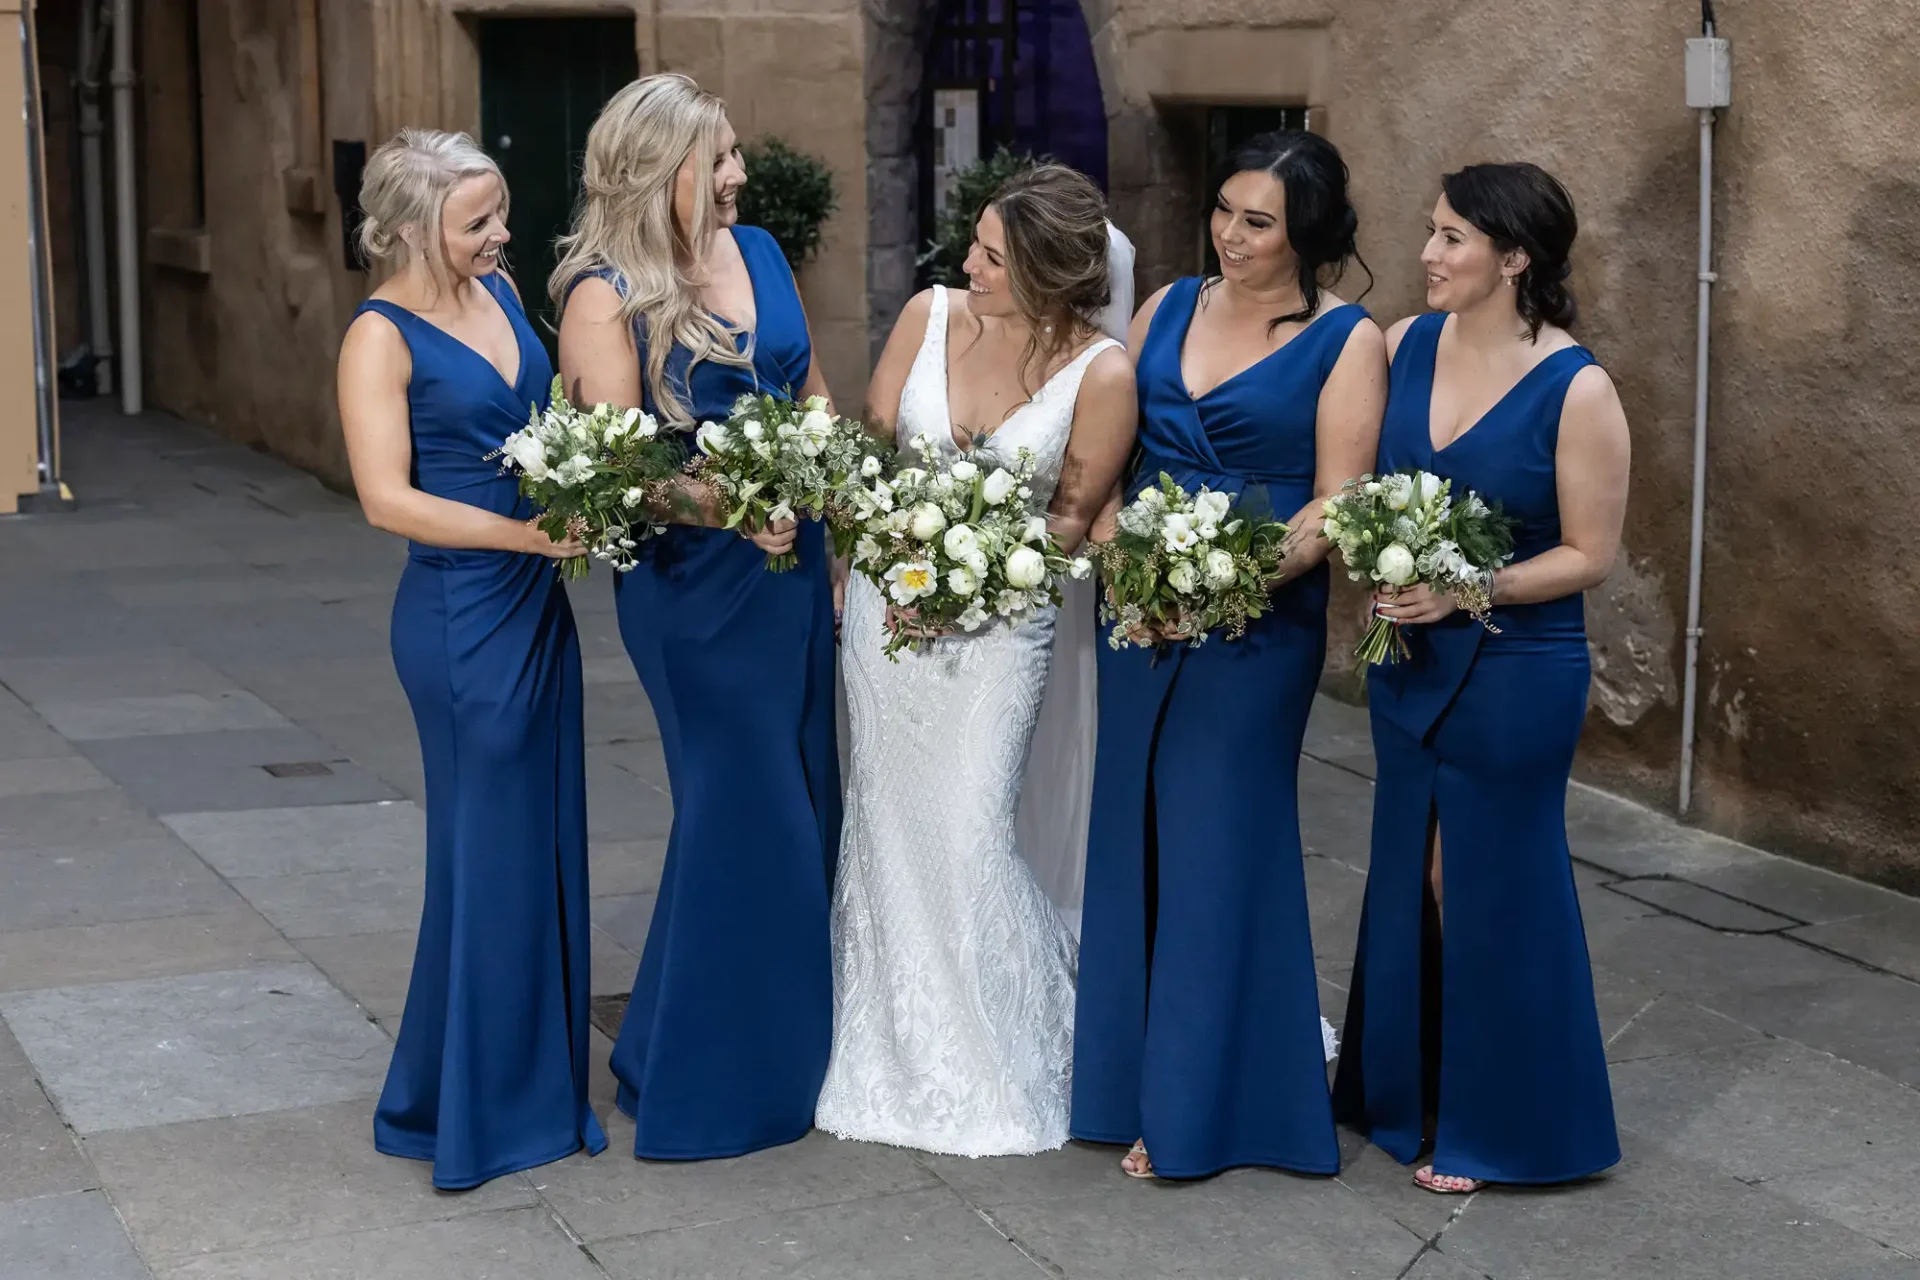 Bride in a white dress surrounded by four bridesmaids in blue dresses, all holding bouquets, on a cobblestone street.